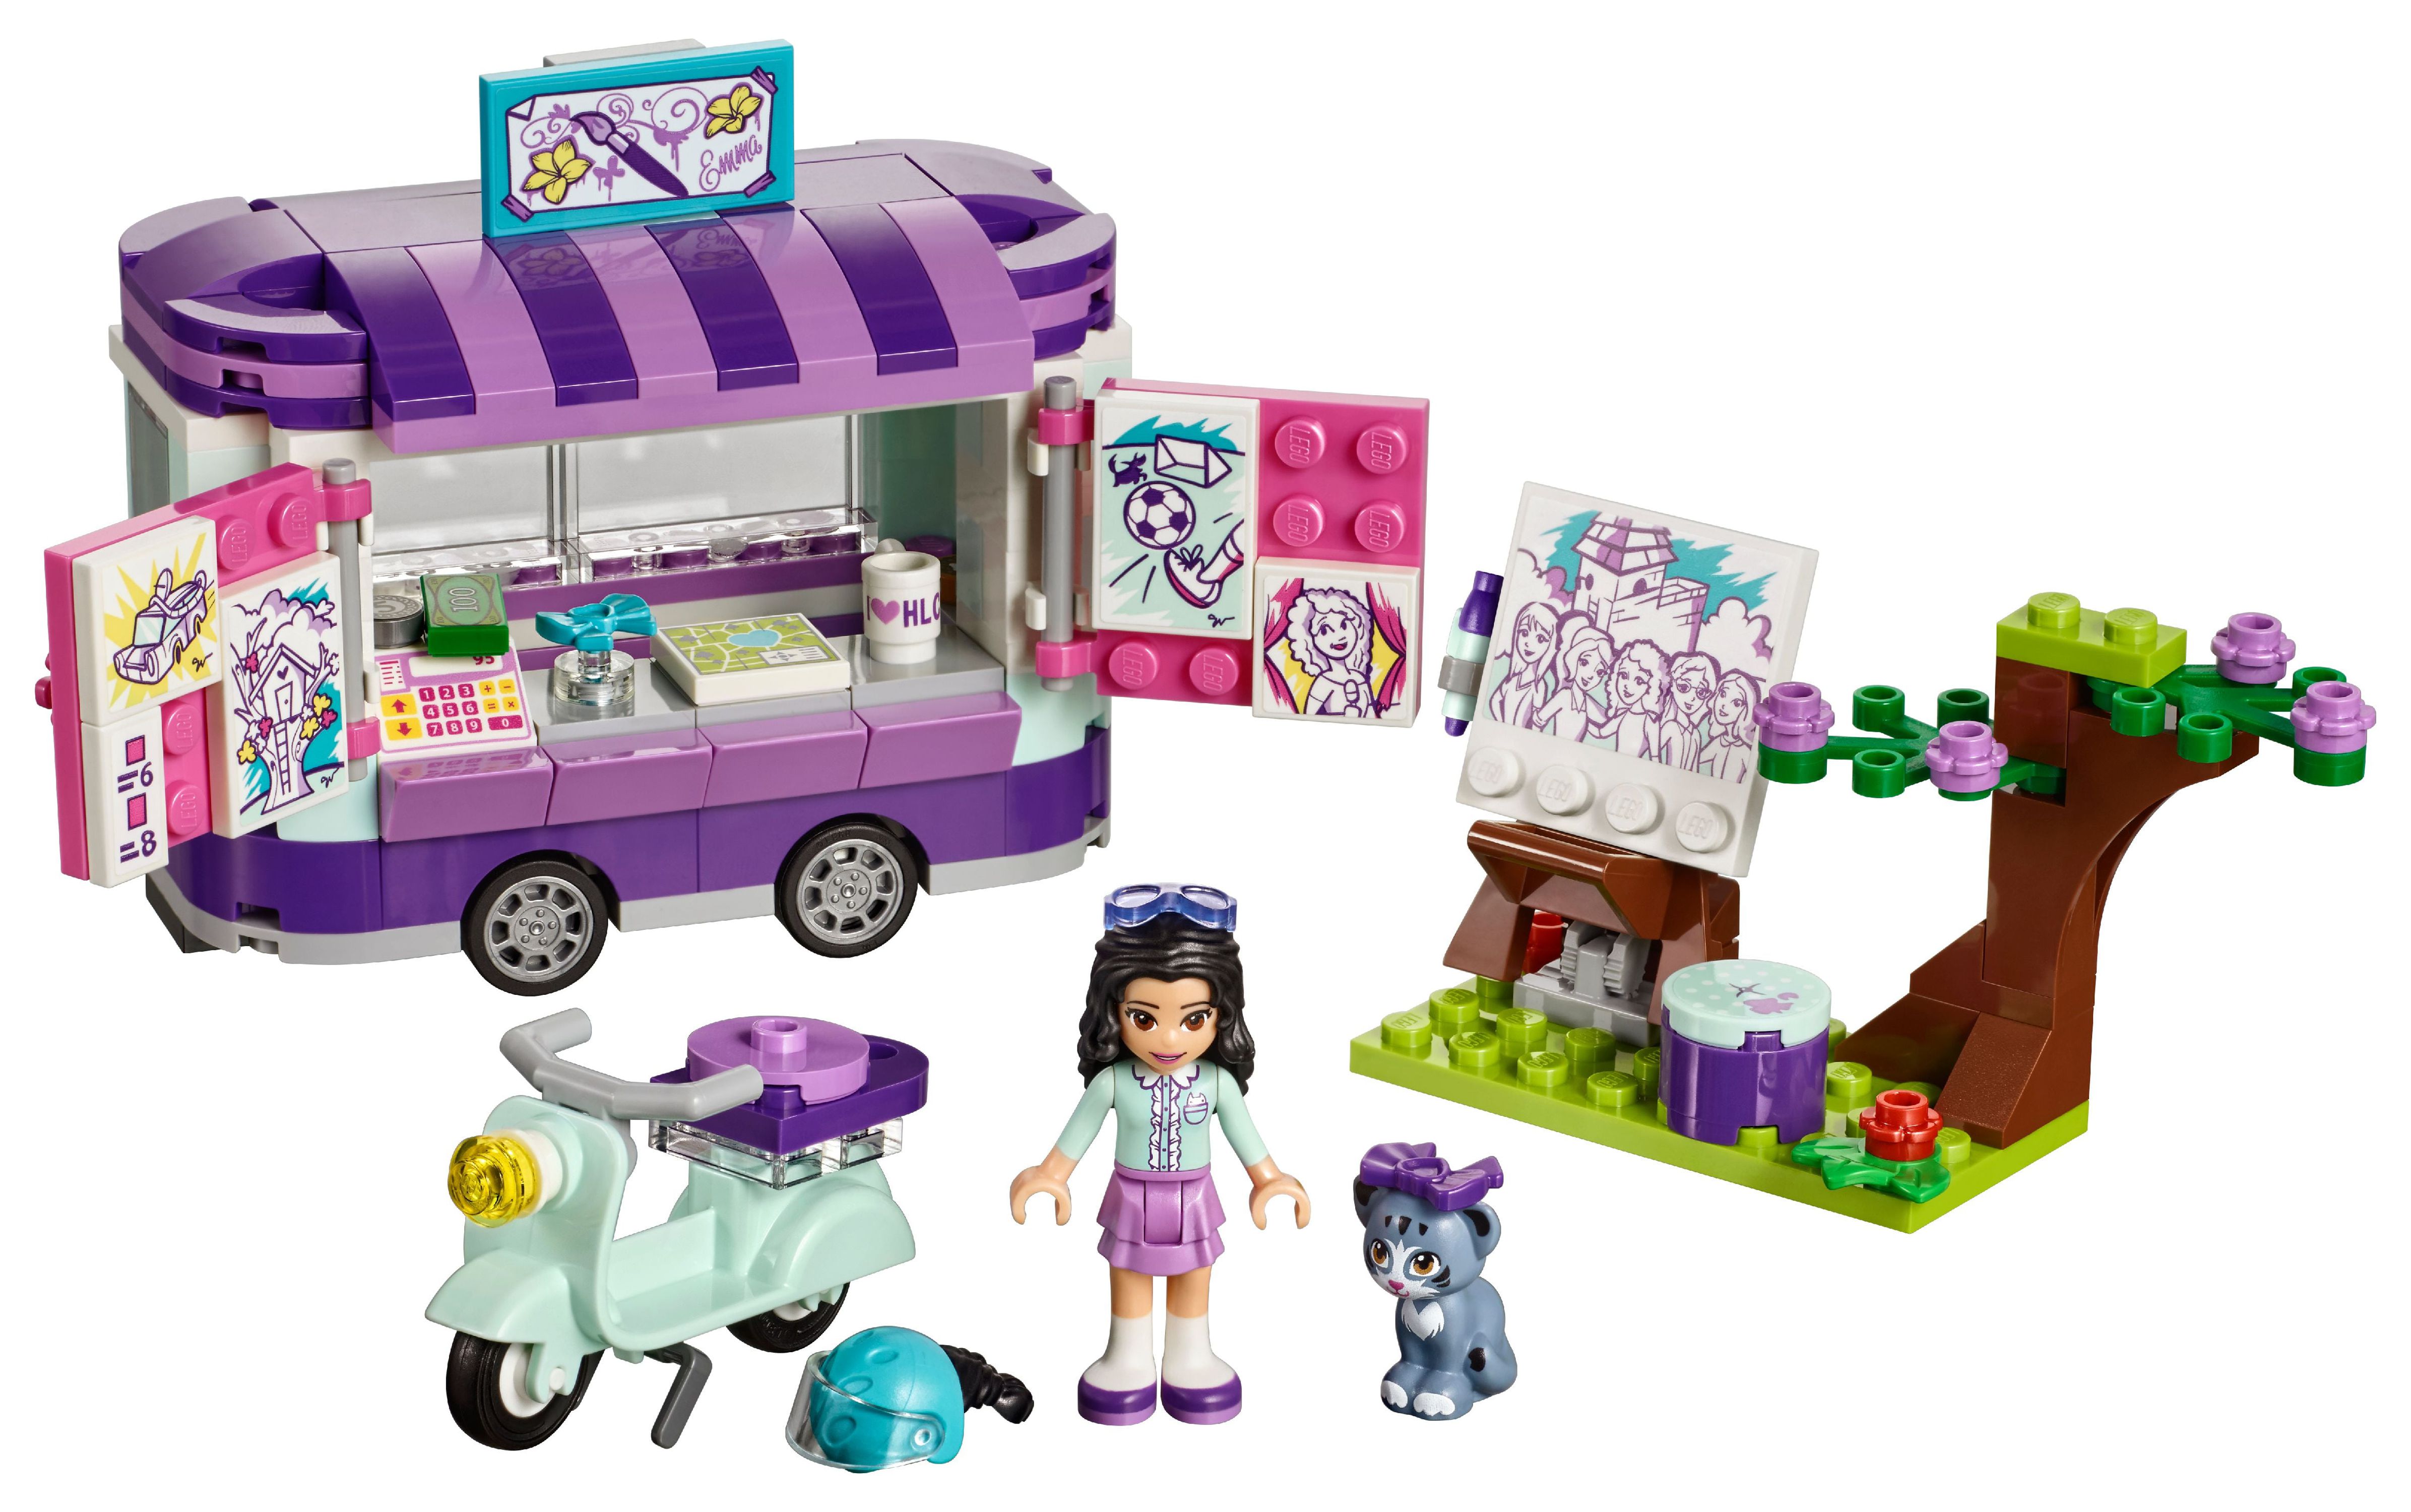 LEGO Friends Emma's Art Stand 41332 - image 2 of 7